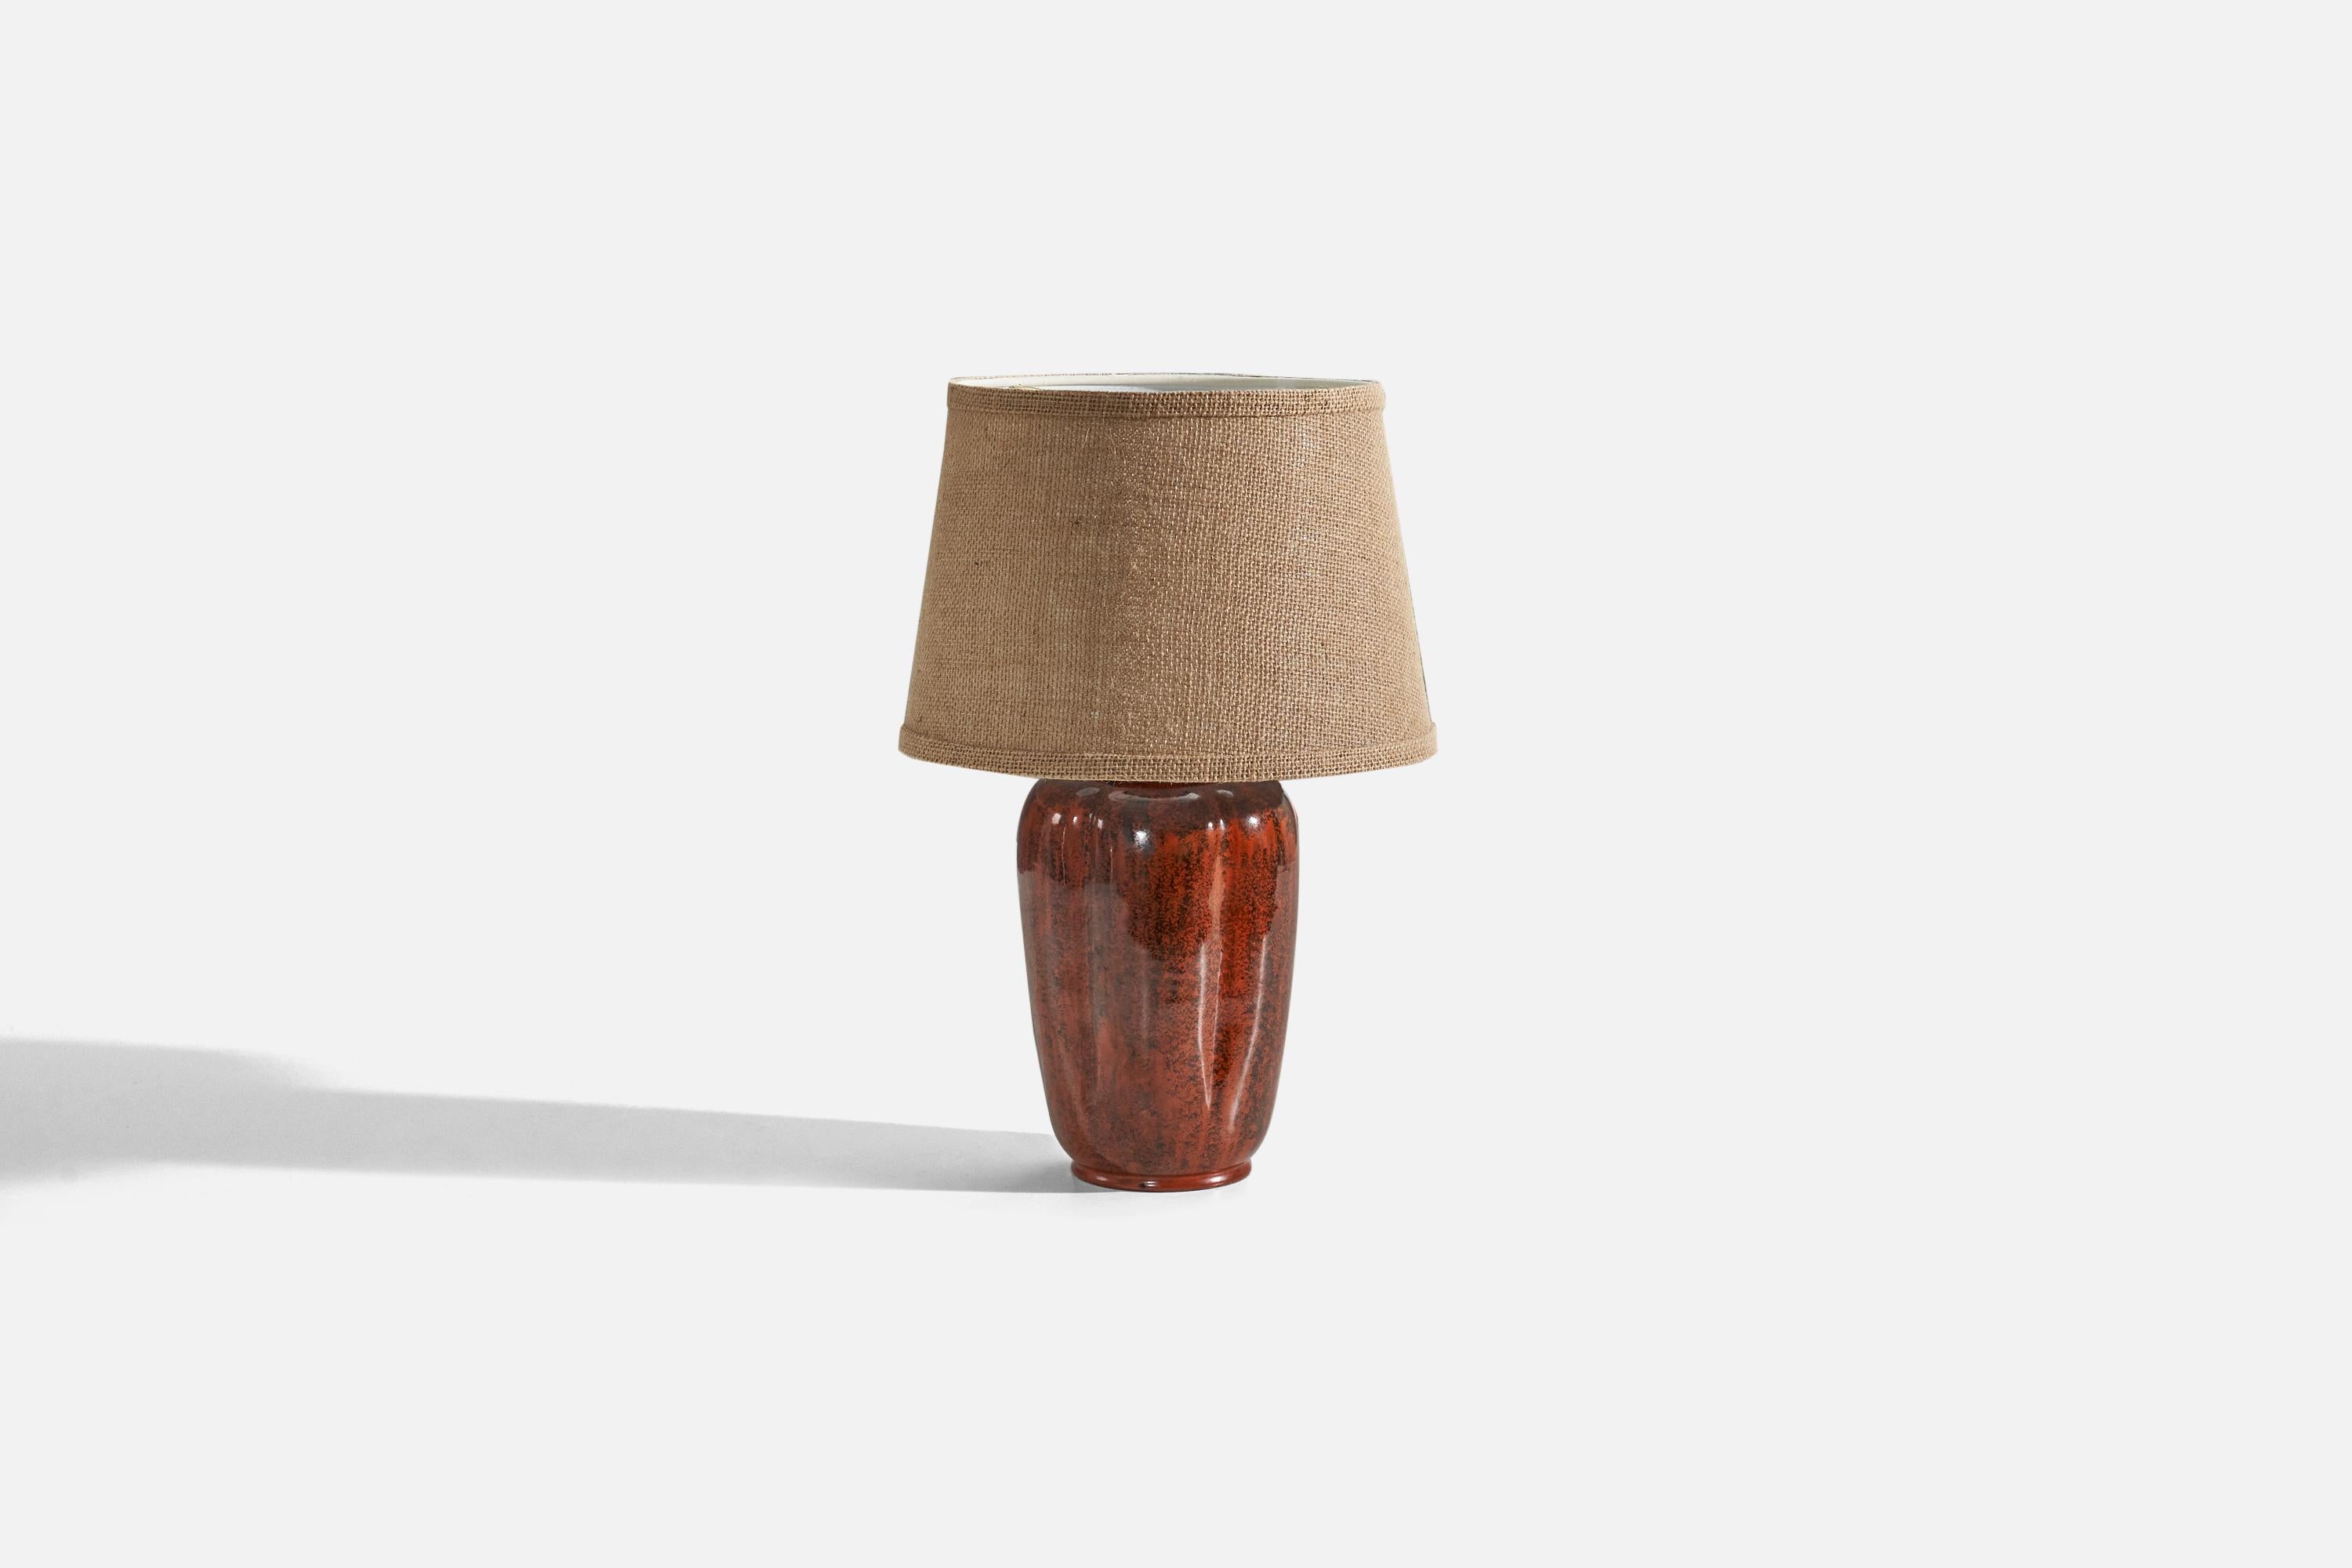 A red and black-glazed ceramic table lamp, designed and produced in Denmark, 1940s.

Sold without lampshade. 
Dimensions of Lamp (inches) : 11.87 x 5.5 x 5.5 (H x W x D)
Dimensions of Shade (inches) : 8 x 10 x 7 (T x B x S)
Dimension of Lamp